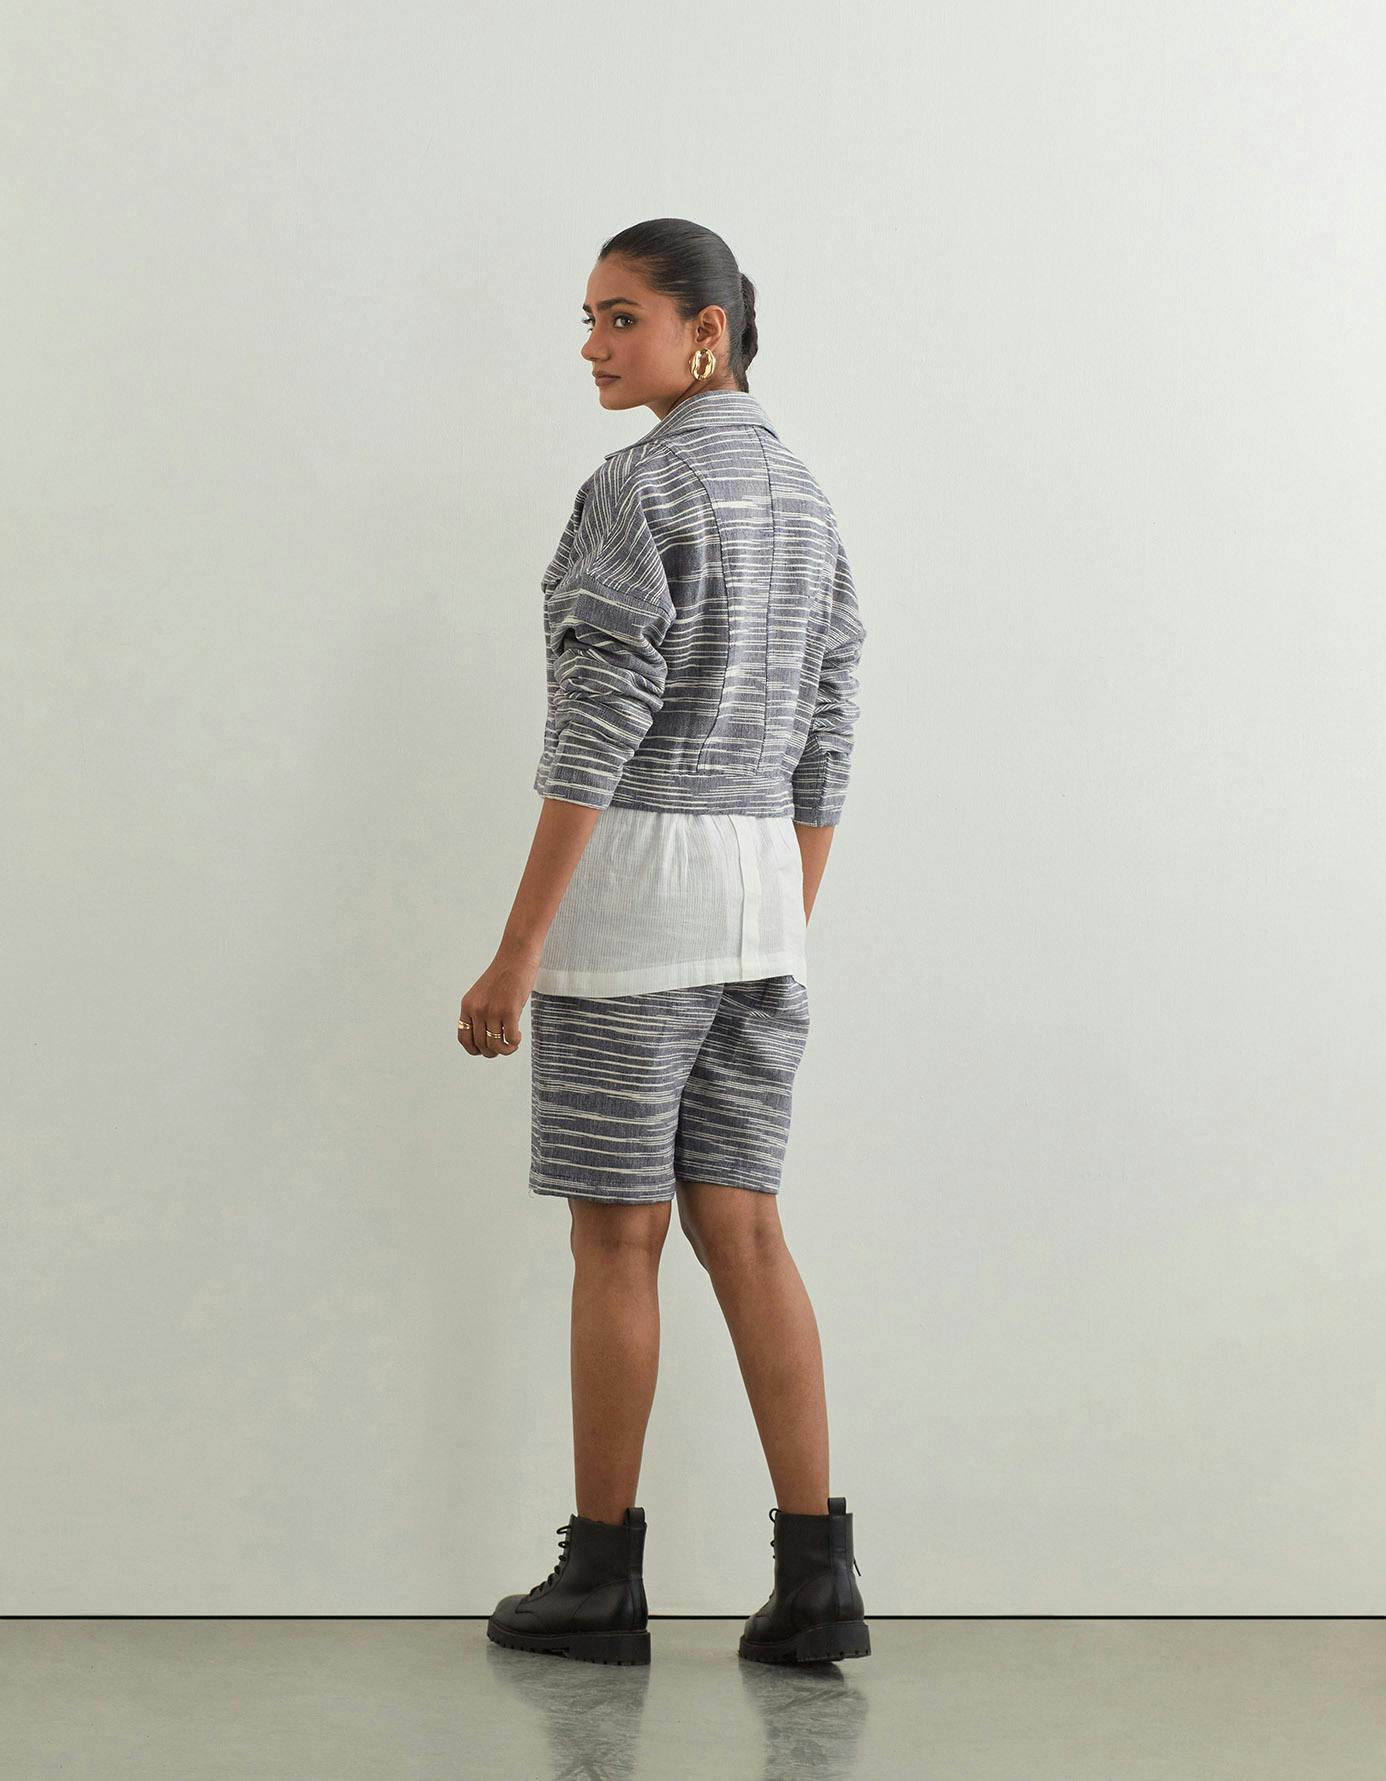 Thumbnail preview #1 for THEO SHORTS In Handwoven